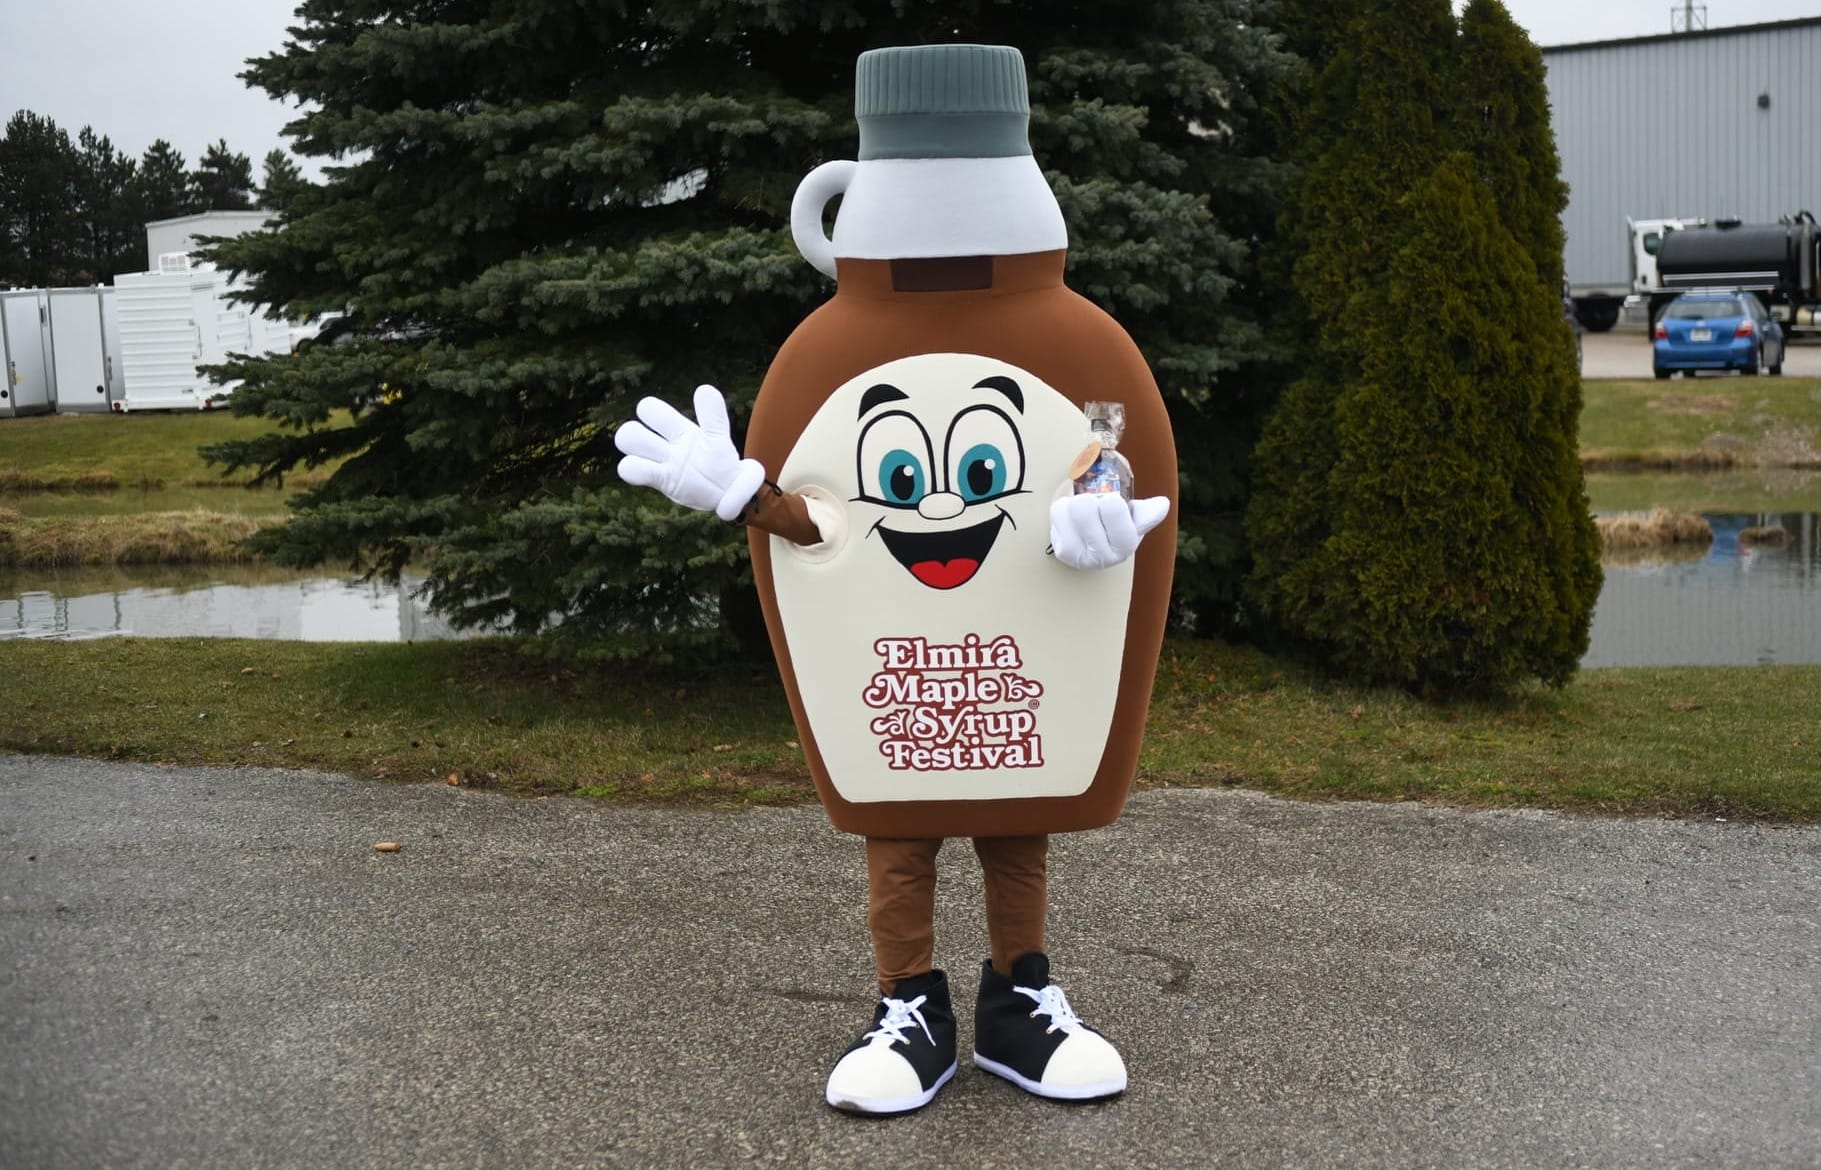 Amber is the newest addition to the Elmira Maple Syrup Festival